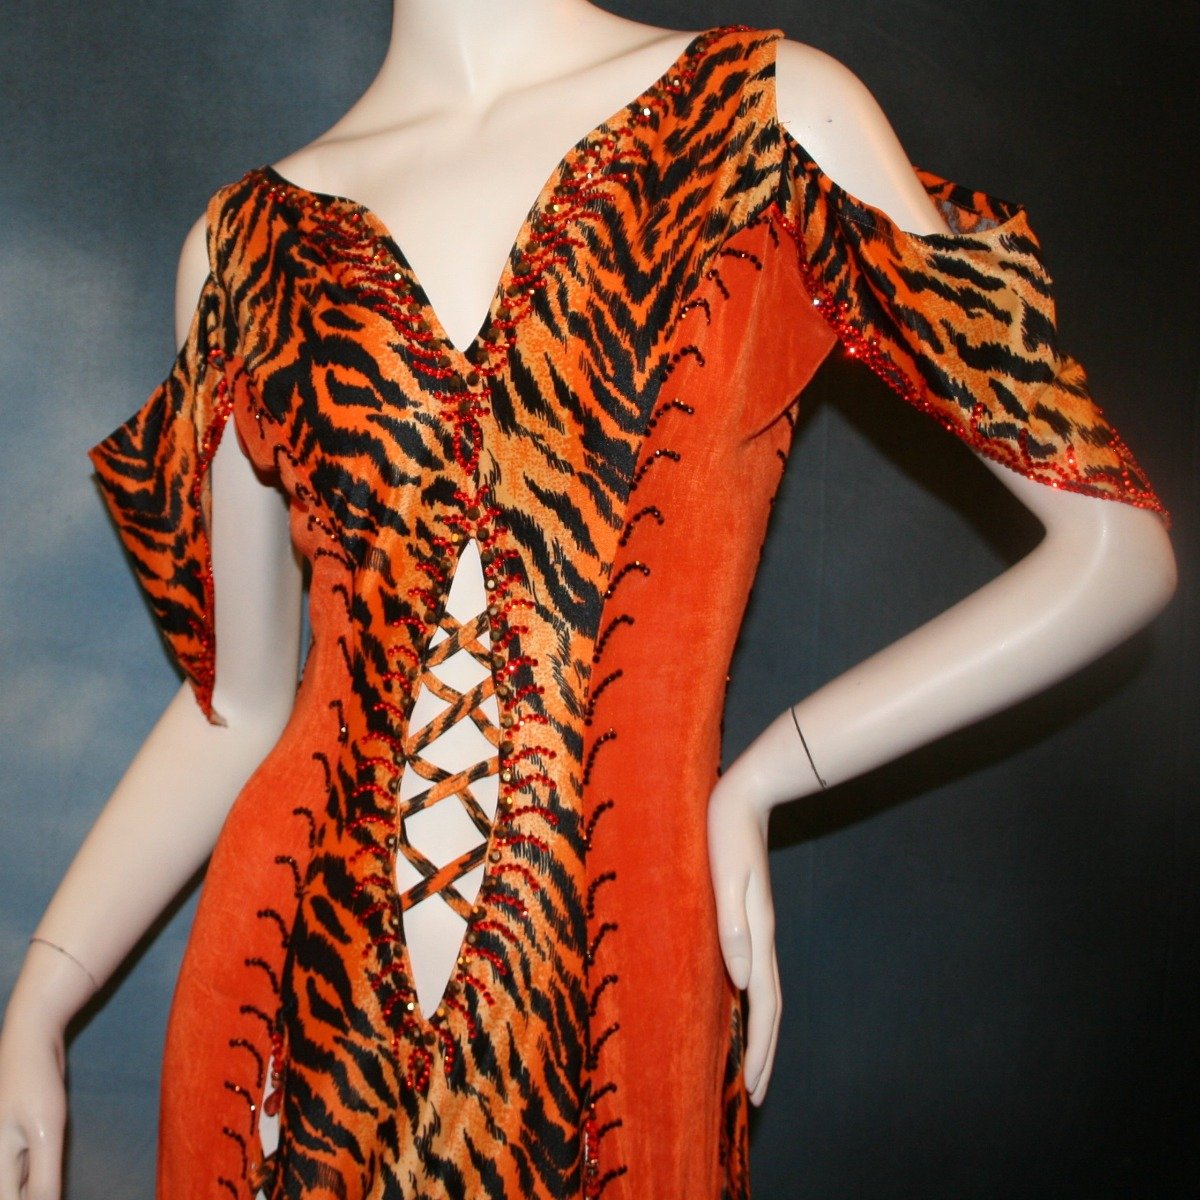 Crystal's Creations close up view of Tiger print & orange Latin/rhythm dress created of tiger print lycra & luxurious orange solid slinky has color blocking, lattice work detailing in front bodice, split sides & low back, as well as intriguing longer back skirting, adorned with orange chandelle feathers, also features detailed Swarovski rhinestone work!